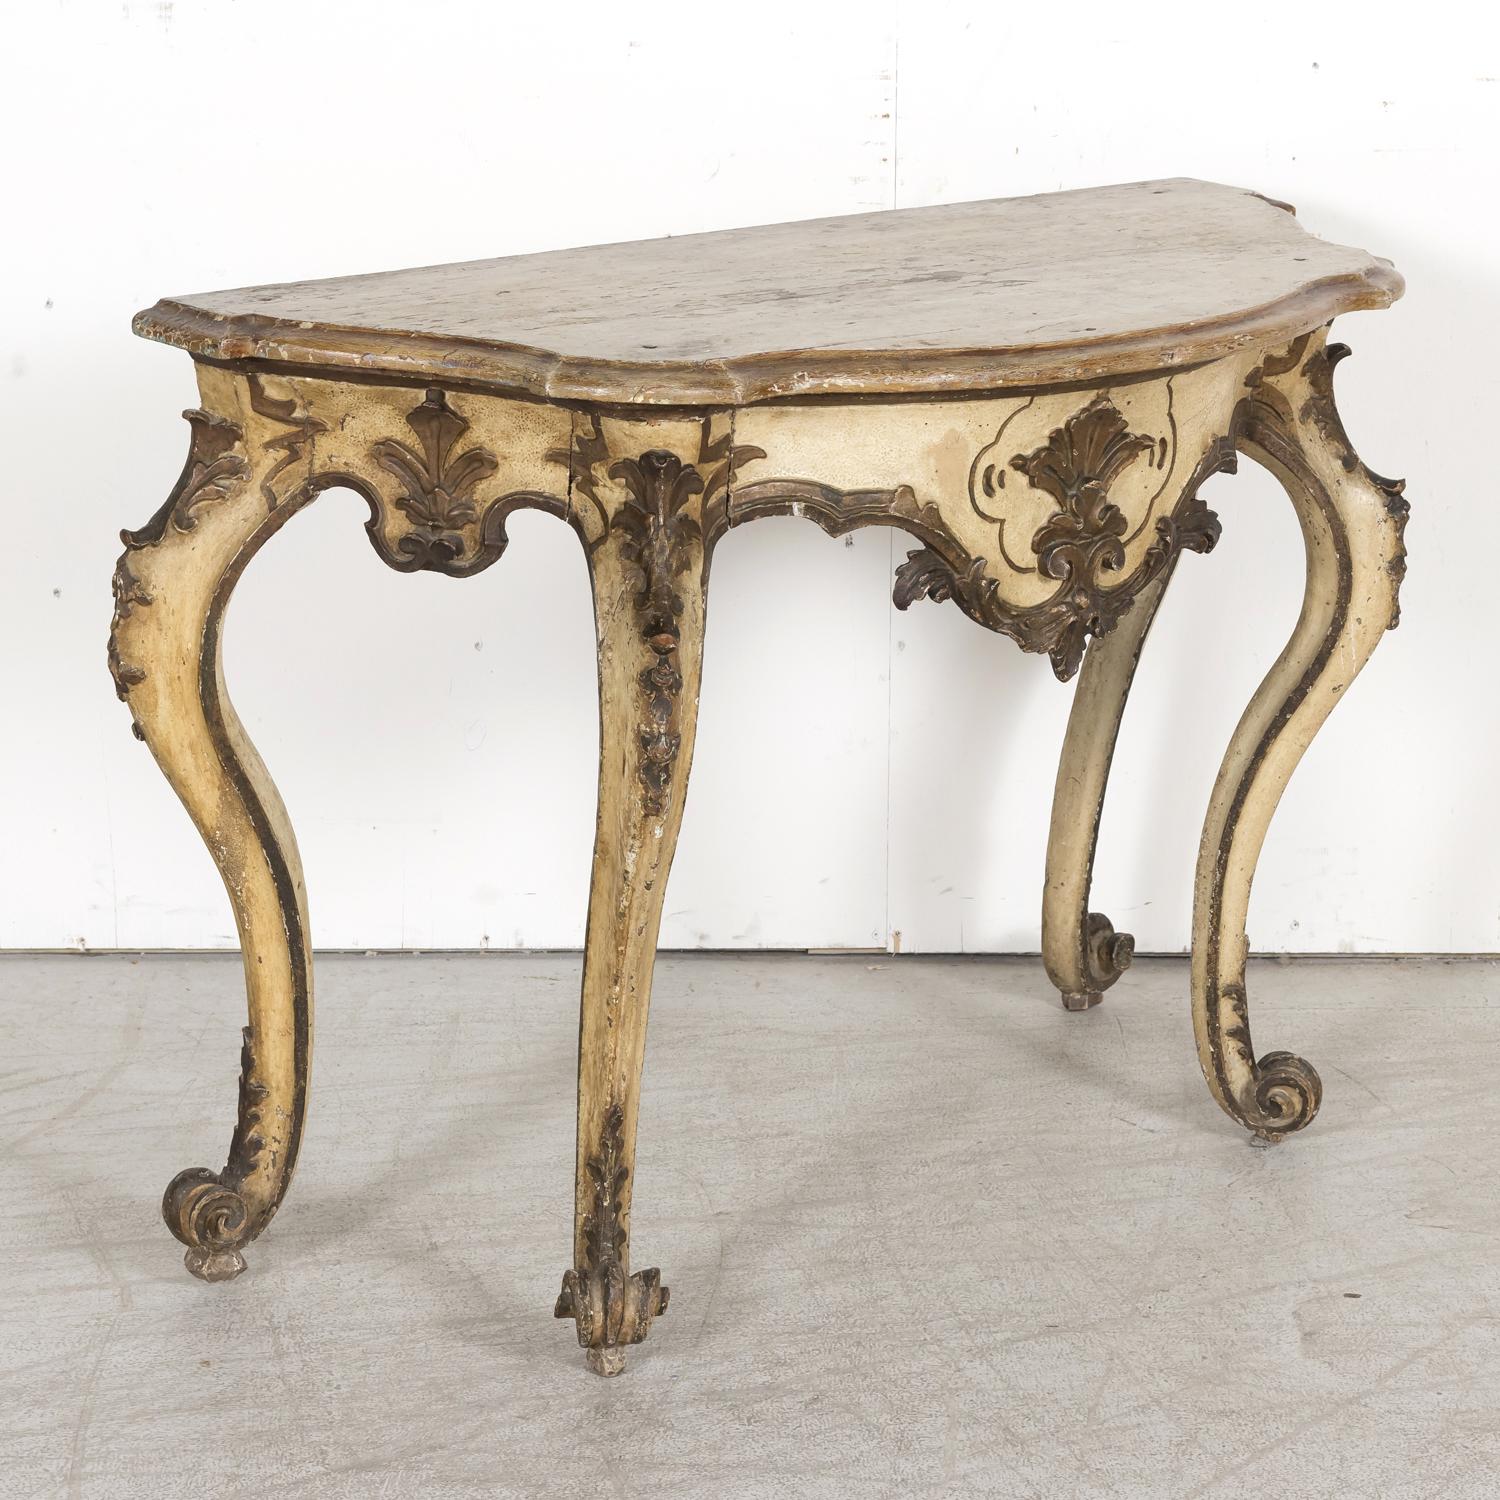 19th Century Italian Rococo Style Painted and Parcel Gilt Console Table In Good Condition For Sale In Birmingham, AL